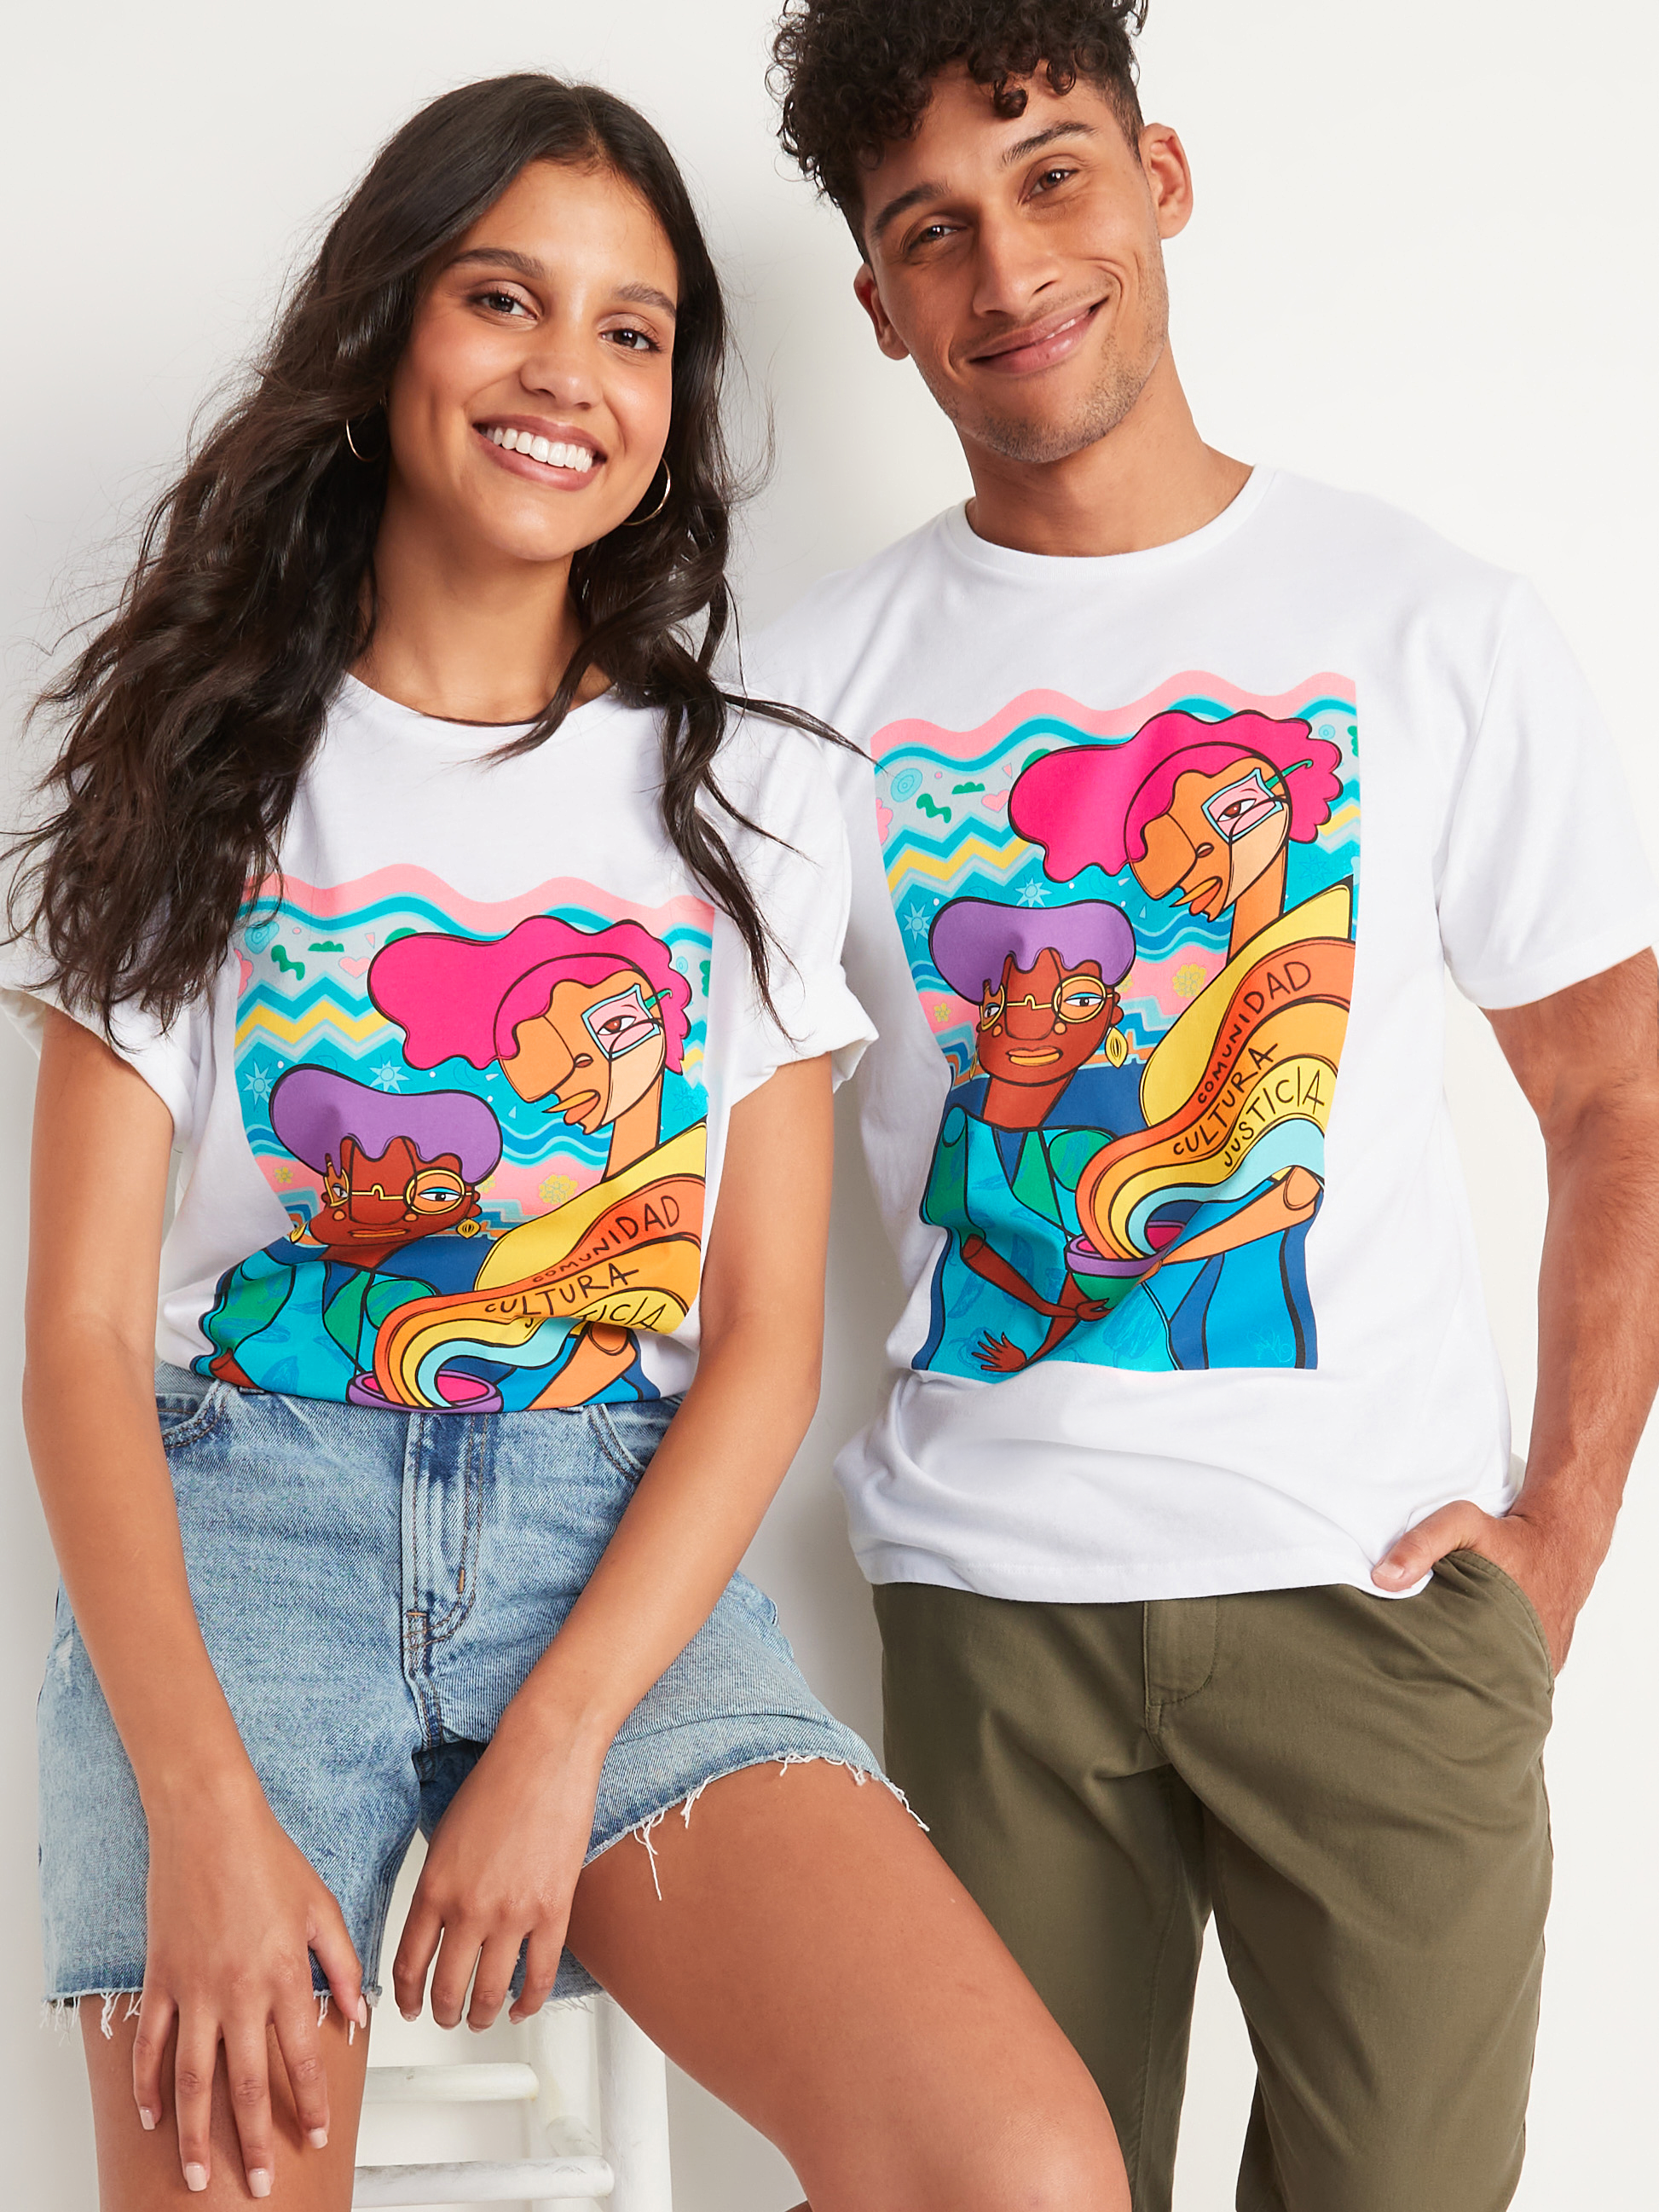 A young woman and a young man modeling Favianna's tees